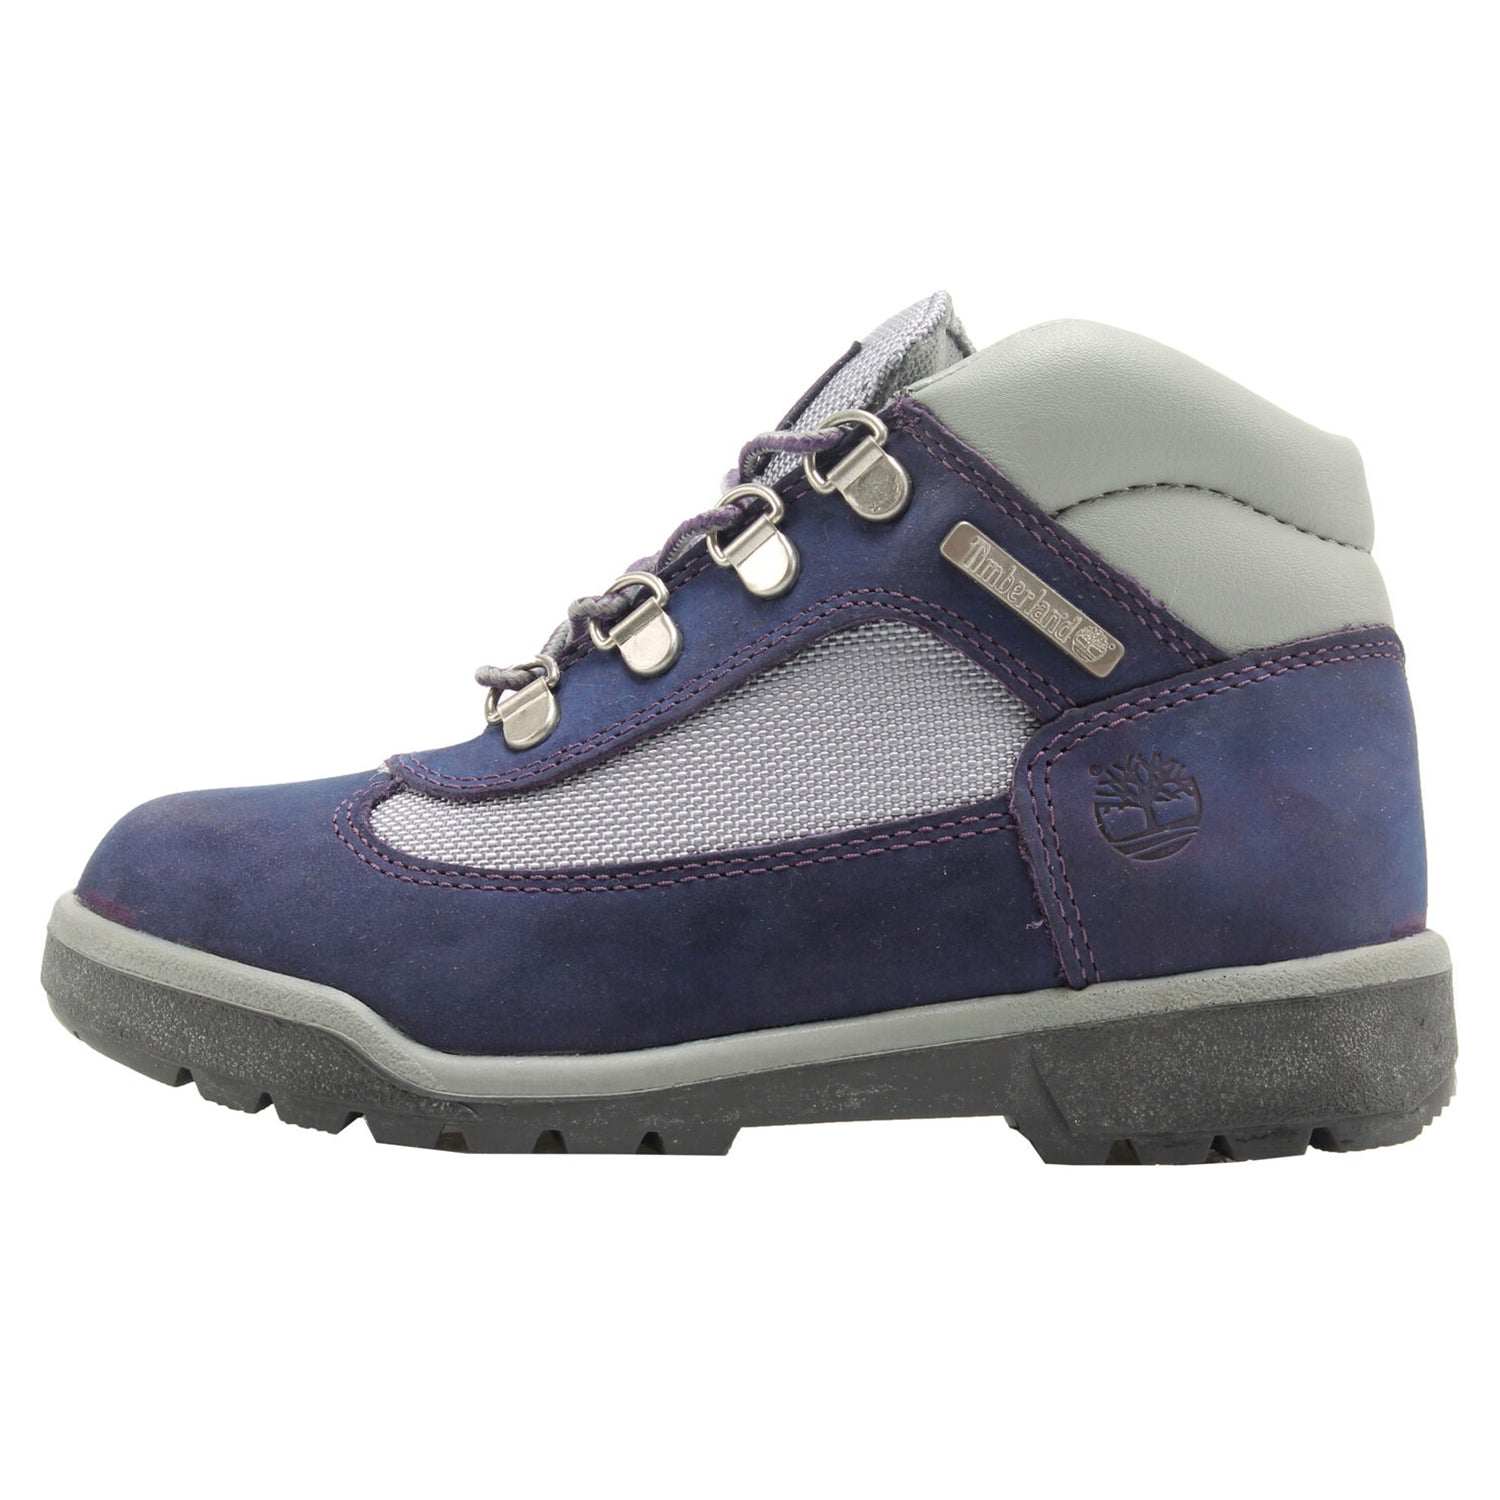 YOUTH'S  FIELD BOOTS Style# 3275R